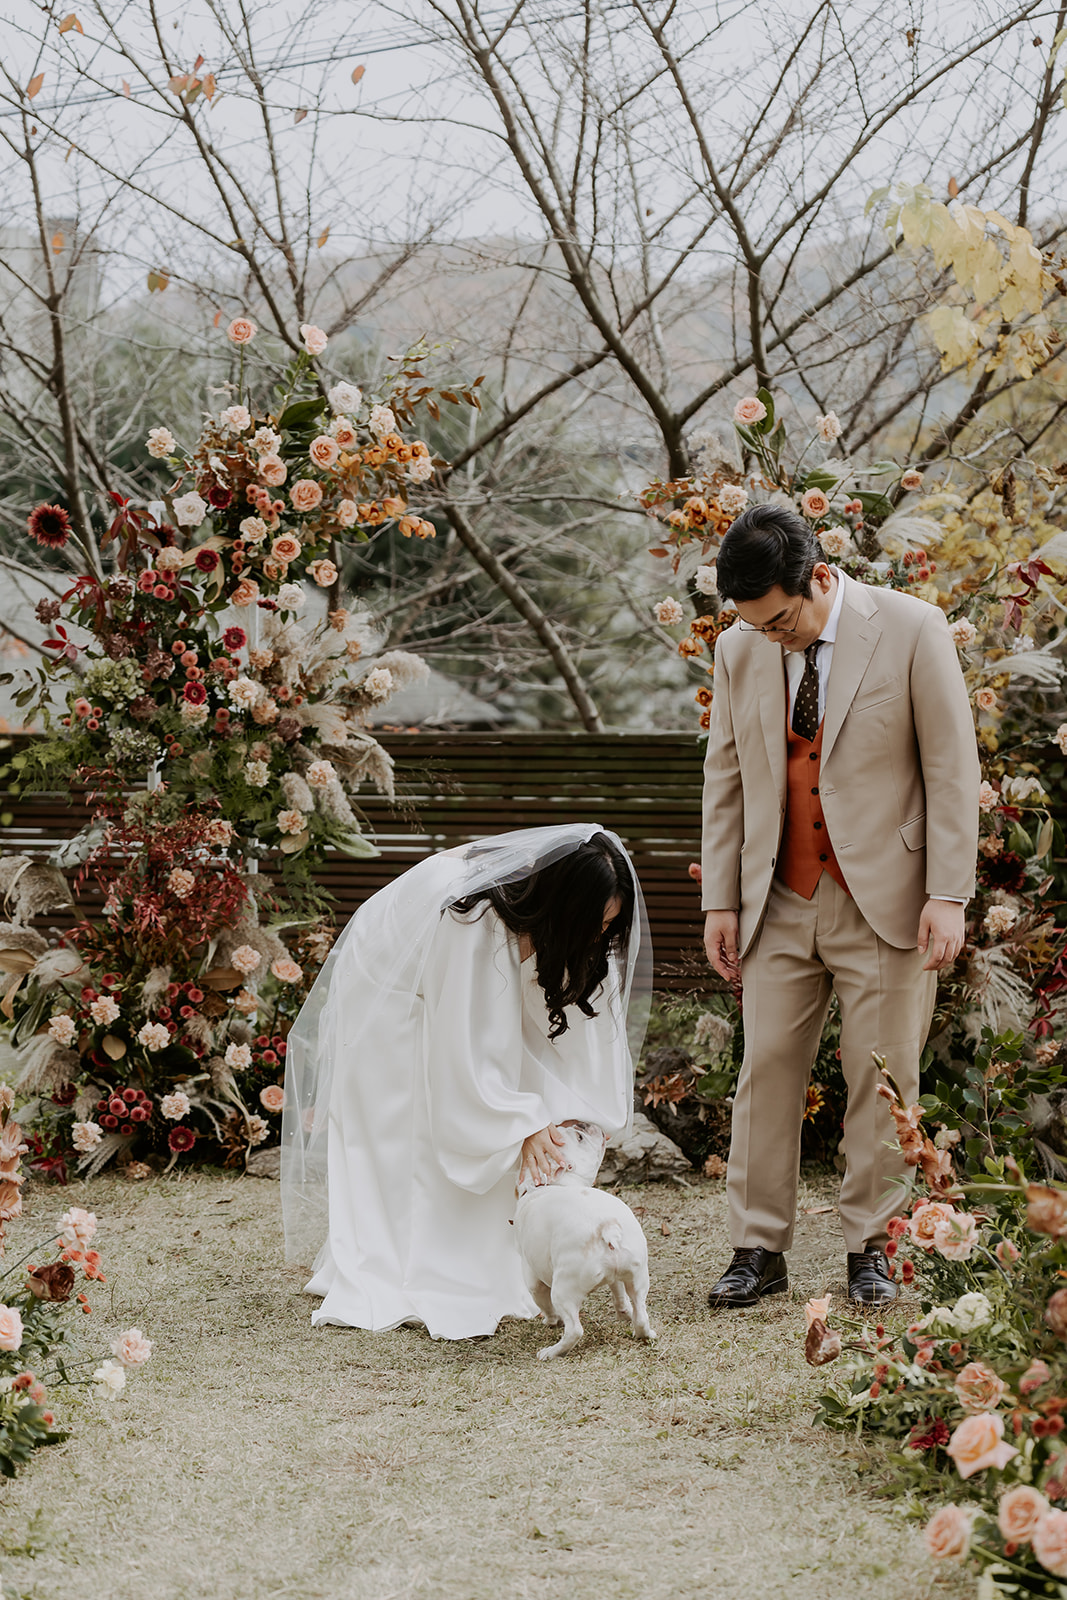 A bride in a white dress and a groom in a tan suit petting a small dog among floral decorations in a garden setting.